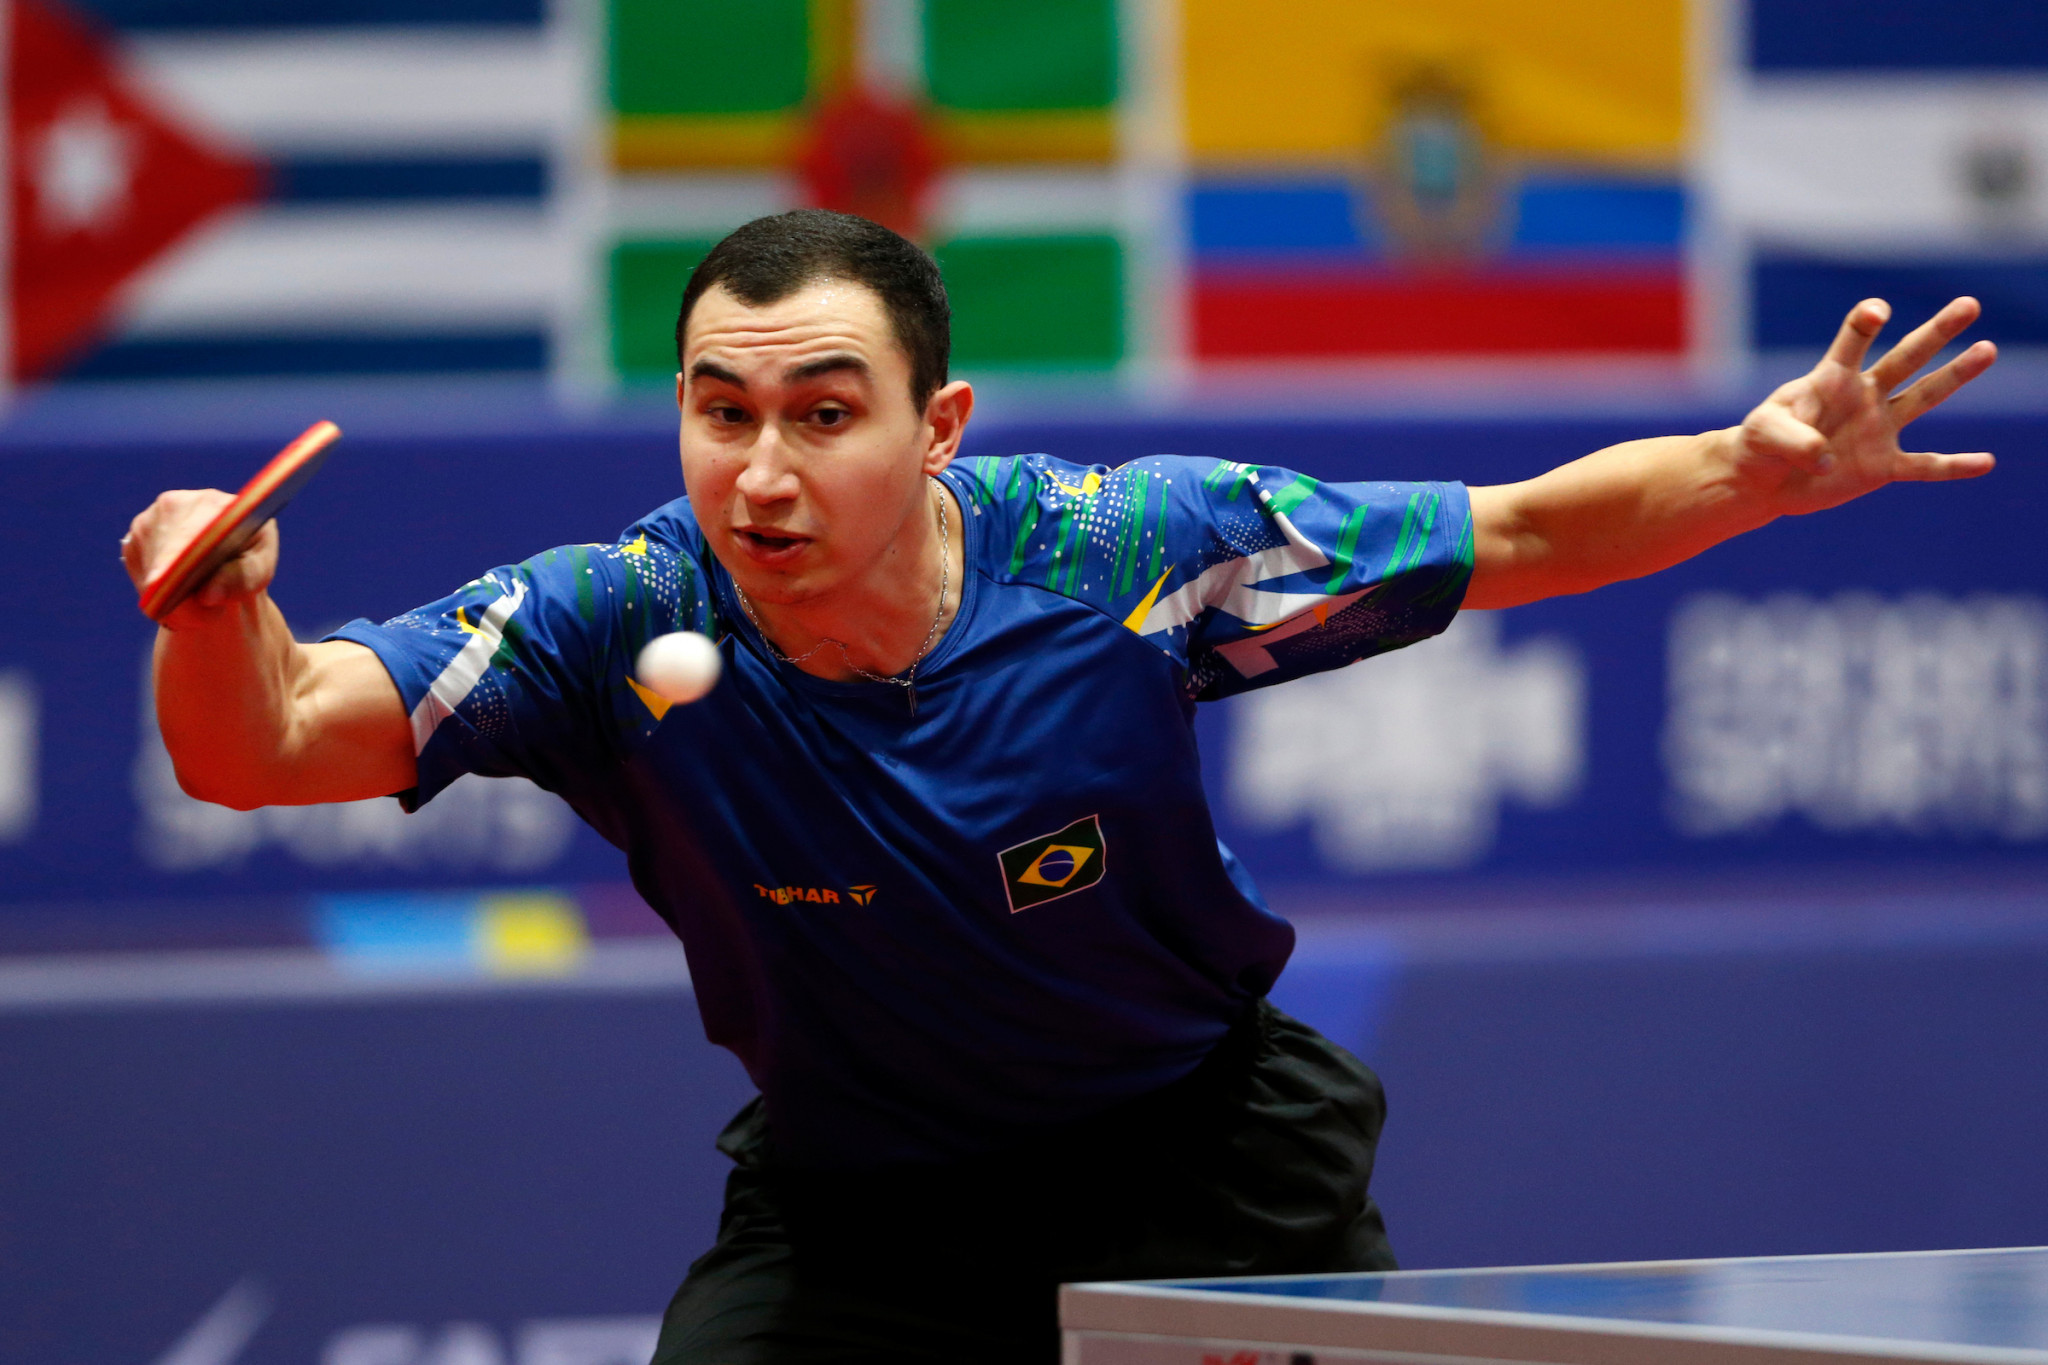 Brazil's men were unable to replicate their compatriots success as they were defeated 3-1 by Chile in the men's team table tennis final ©Agencia.Xpress Media